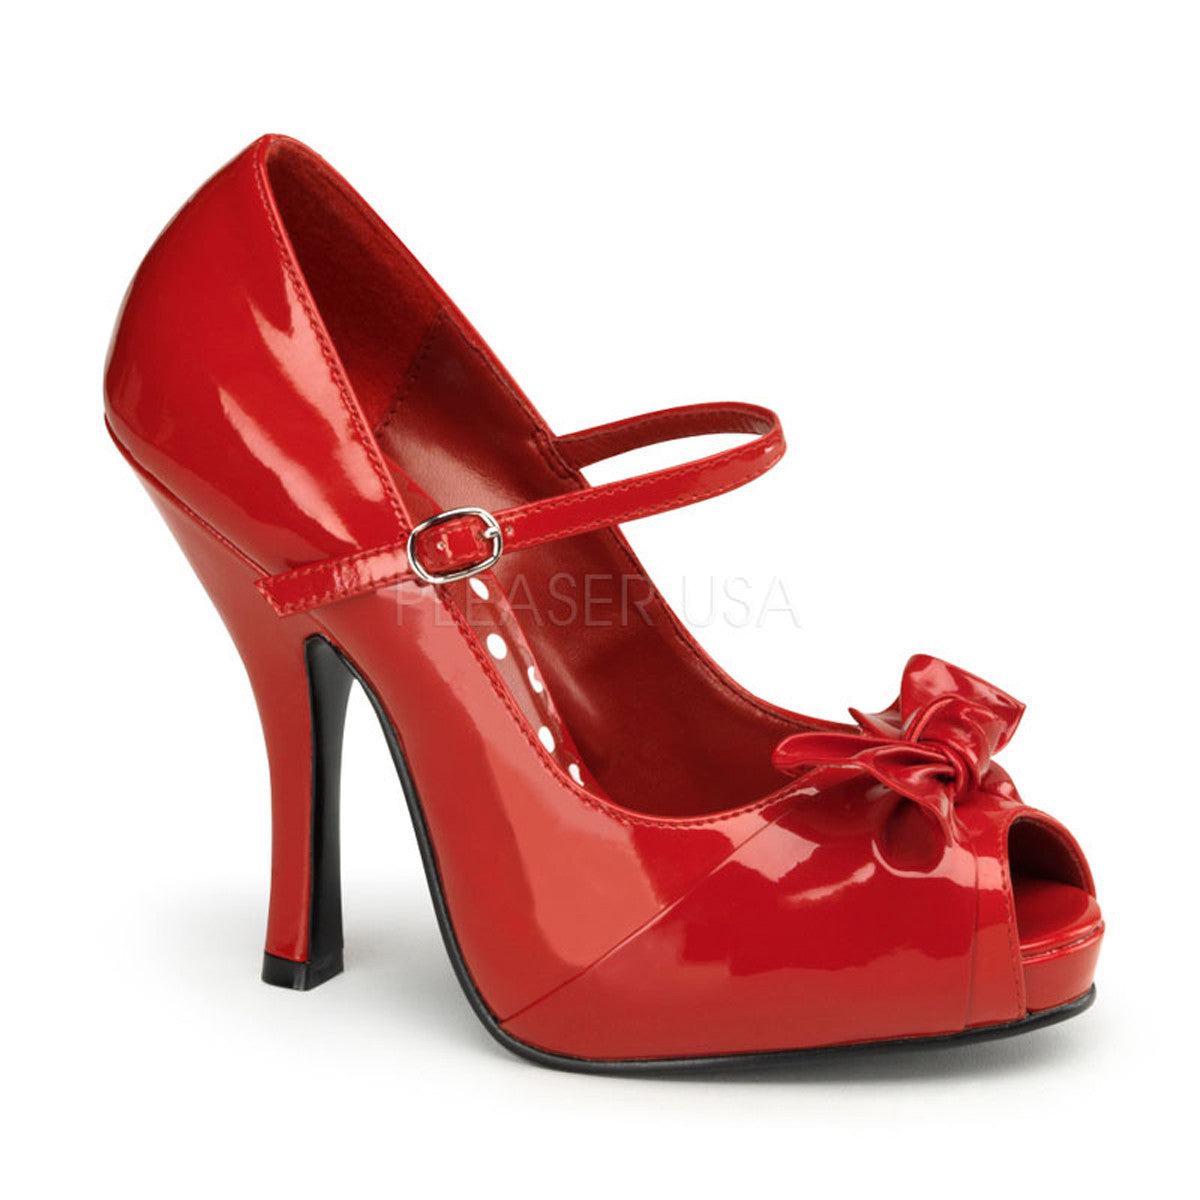 4 inch Heel CUTIEPIE-08 Red Pat Retro Mary Jane Pumps | PINUP COUTURE ...